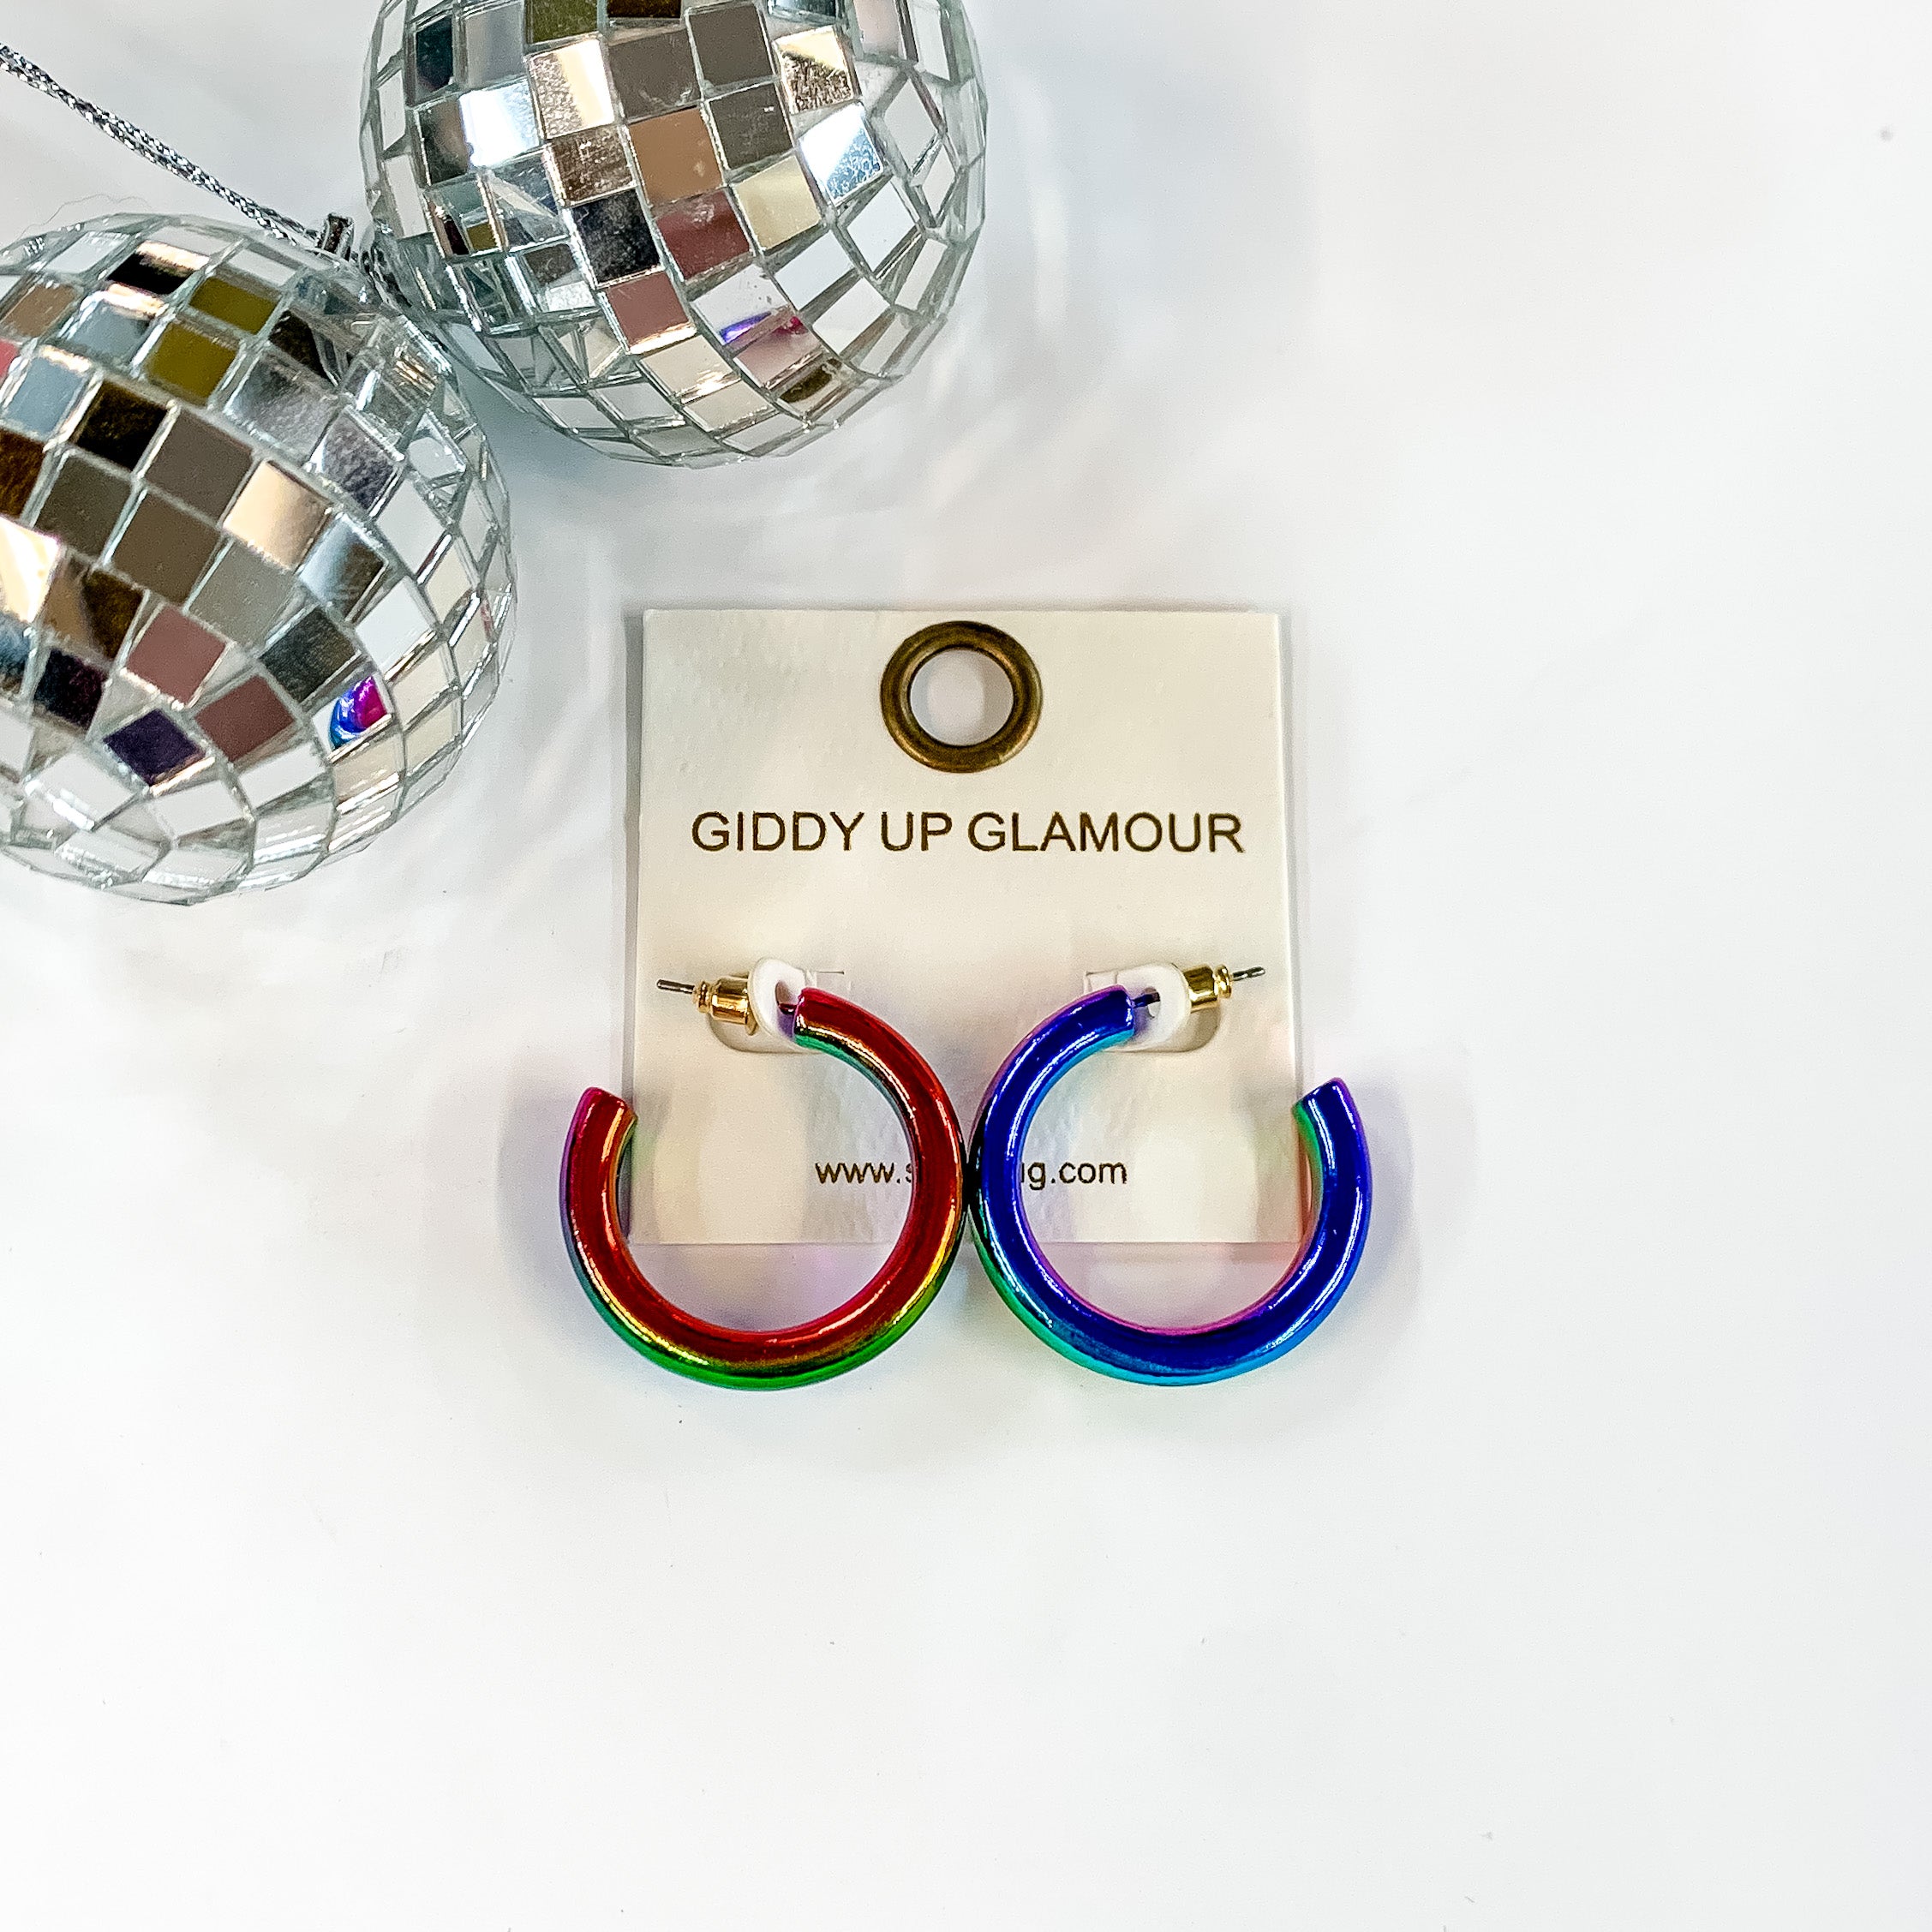 Light Up Small Neon Hoop Earrings In Multicolored. Pictured on a white background with a disco ball in the top left corner.